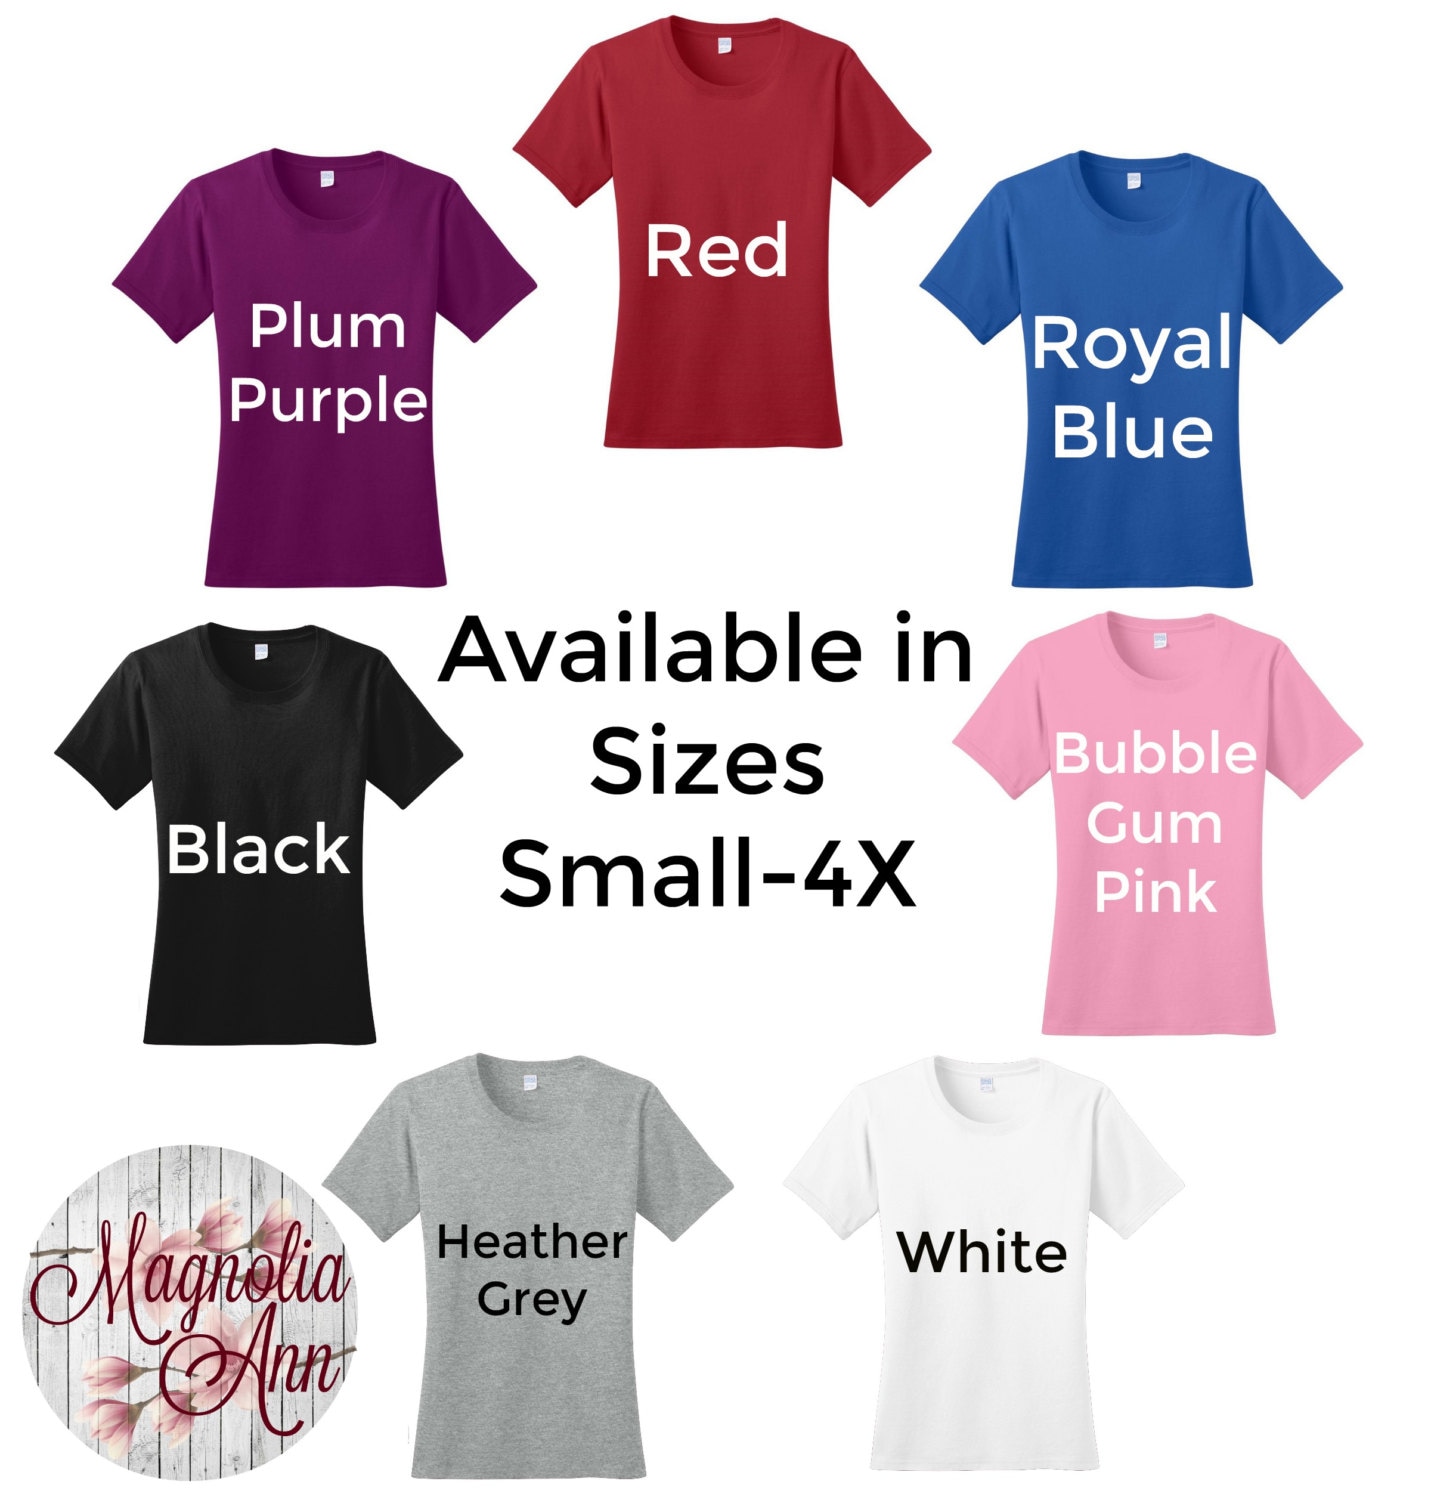 Women's Premium Jersey V-Neck T-shirt in Sizes Small-4X Thanksgiving Plus Size Football Turkey Nap Repeat Plus Size Clothing Curvy